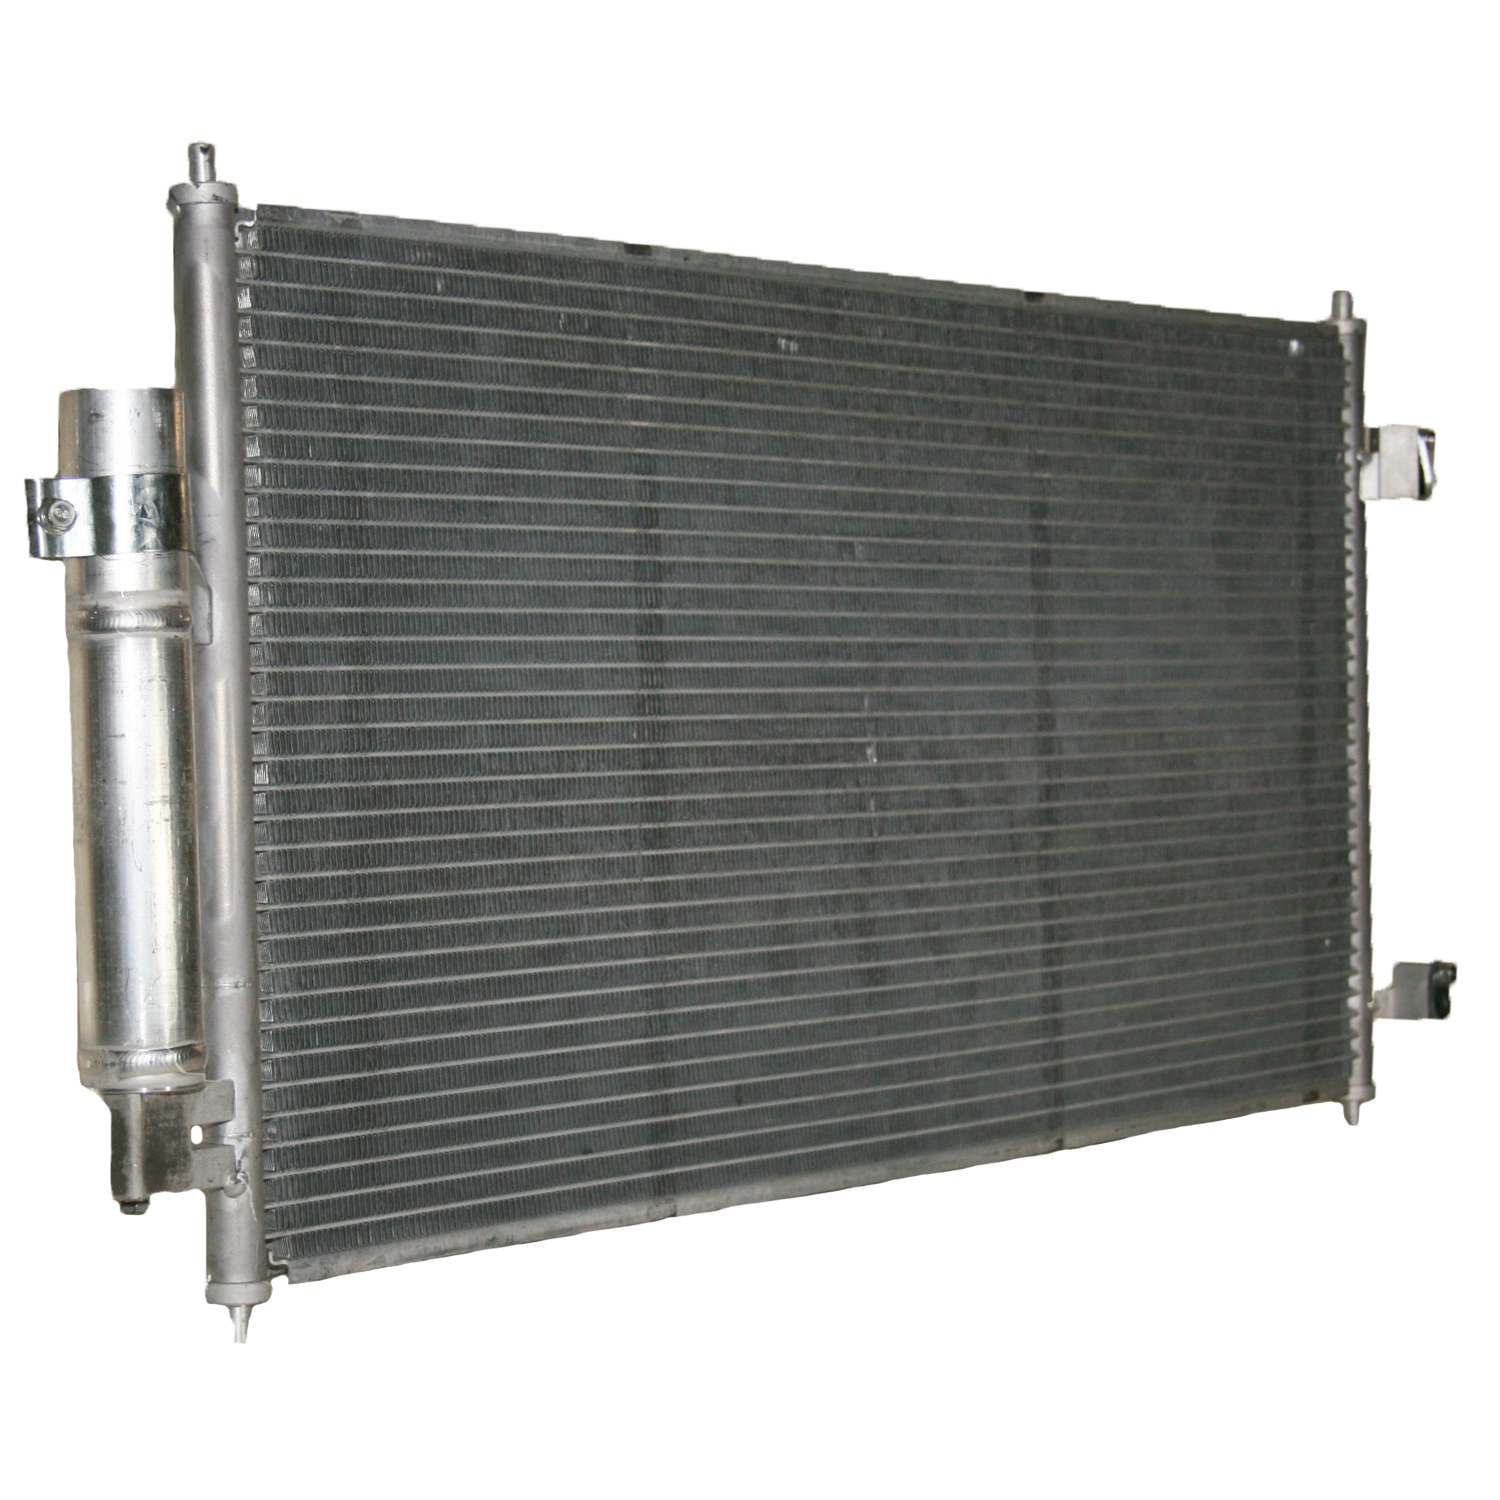 TCW Condenser 44-3628 New Product Image field_60b6a13a6e67c